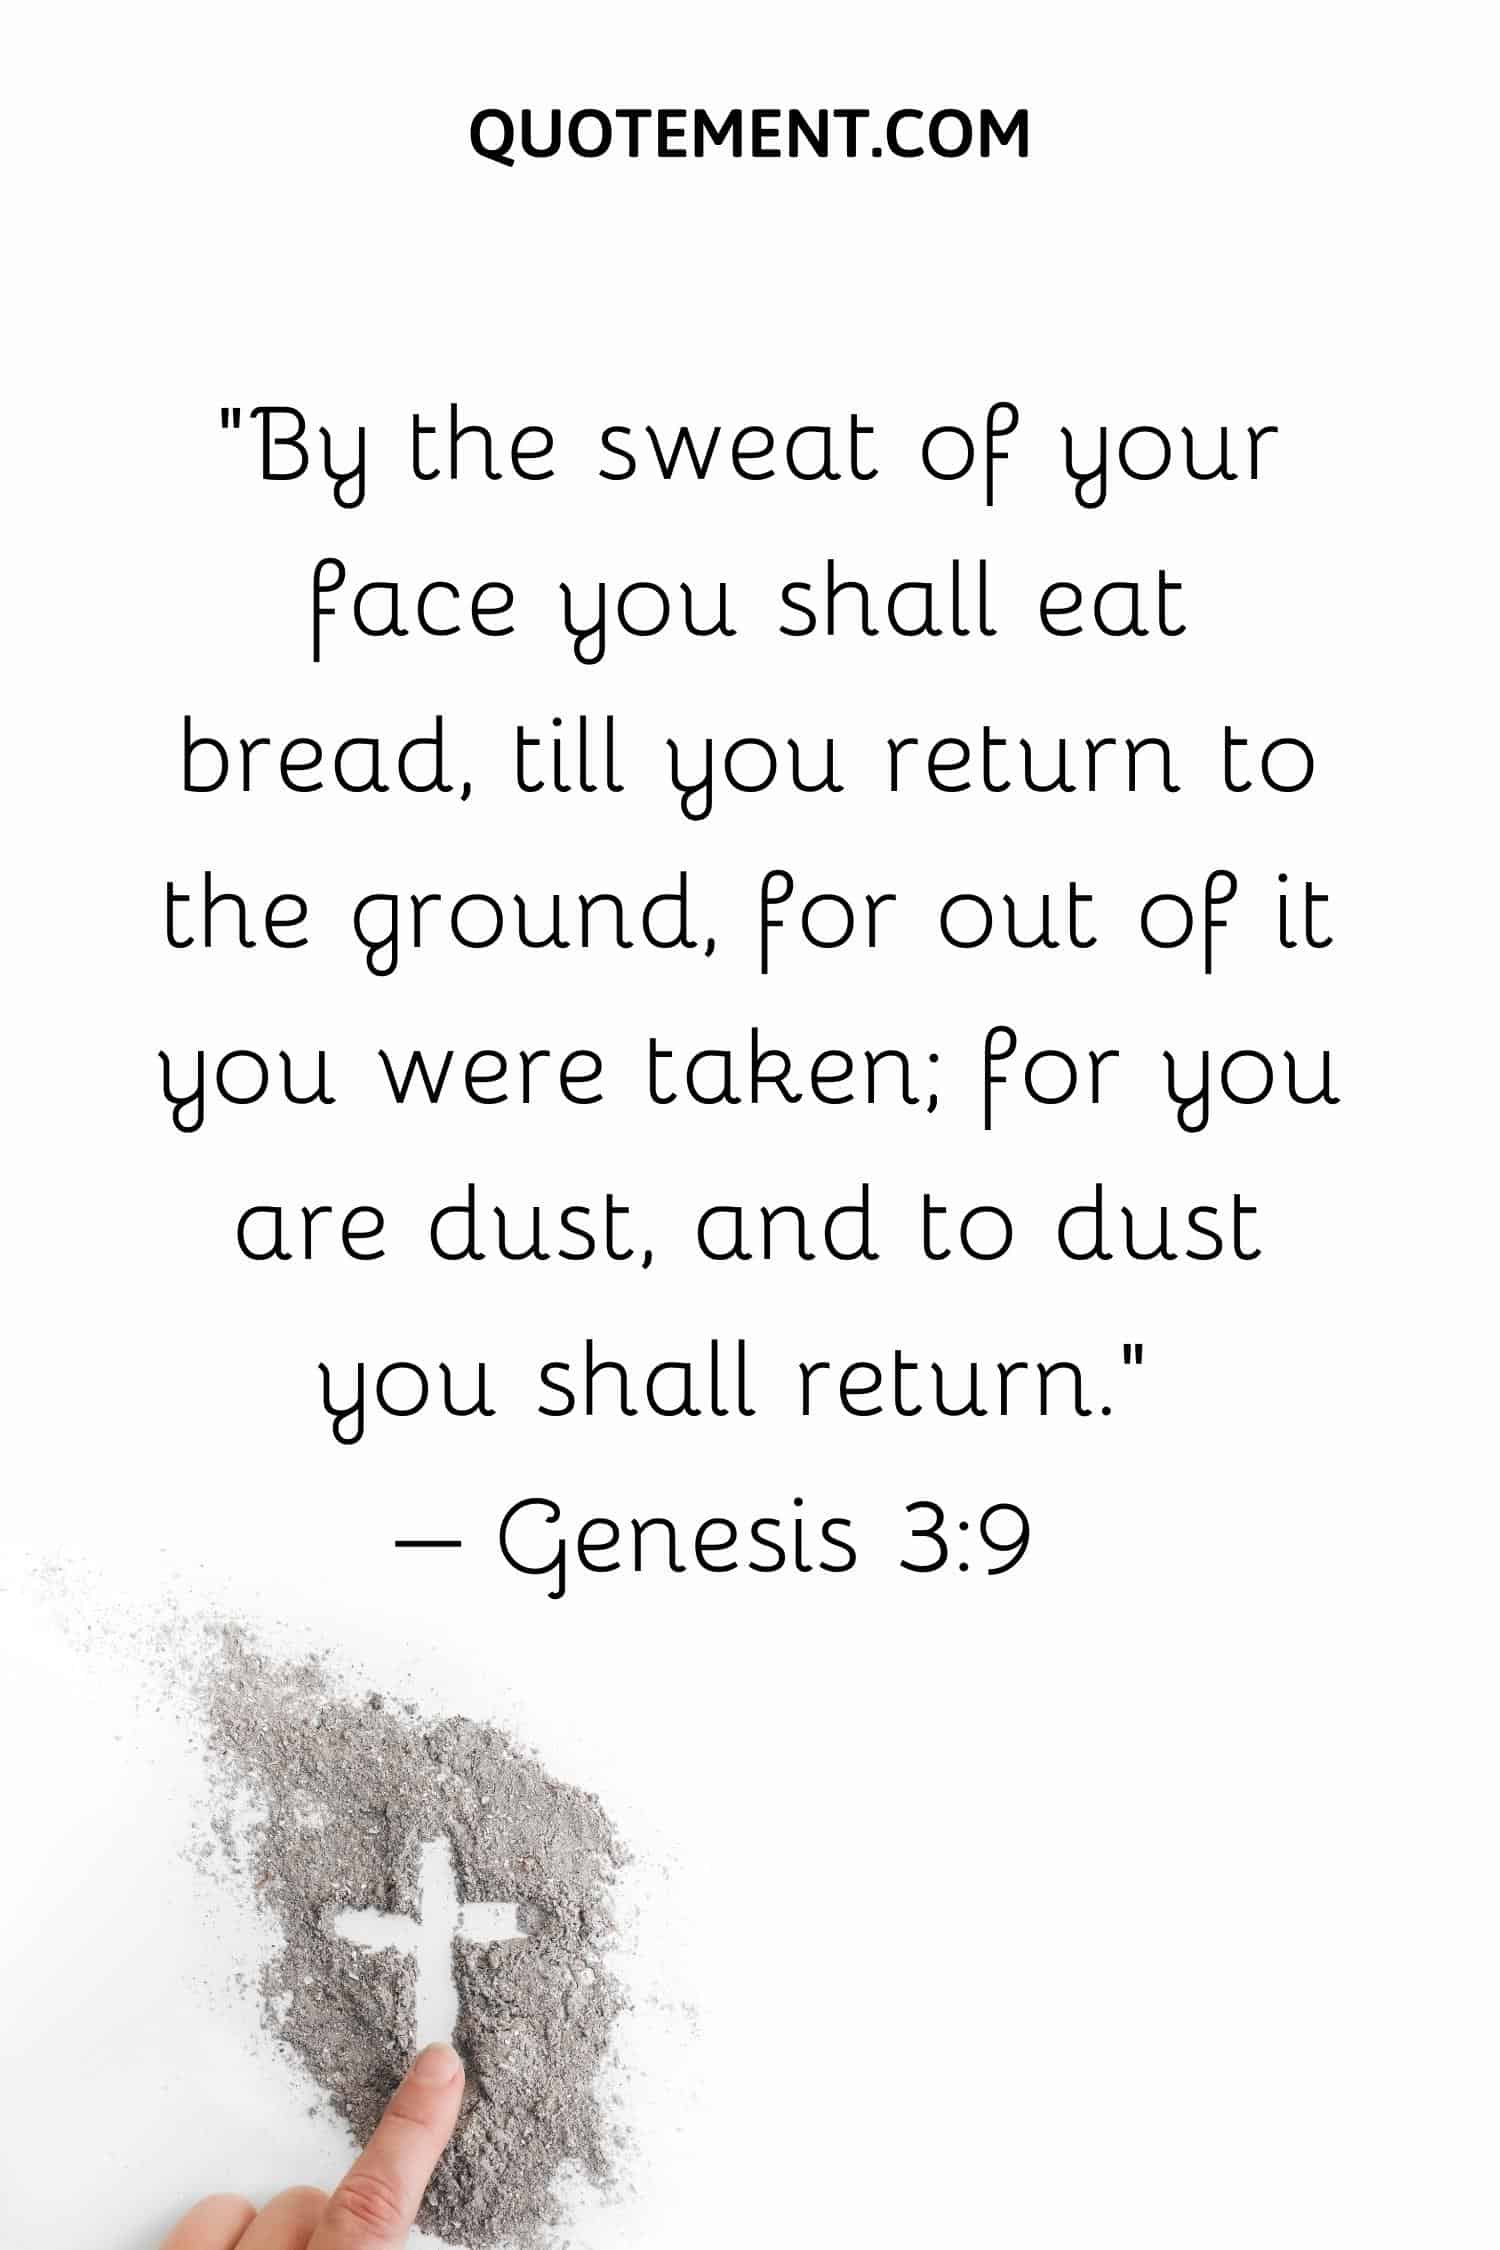 By the sweat of your face you shall eat bread, till you return to the ground, for out of it you were taken